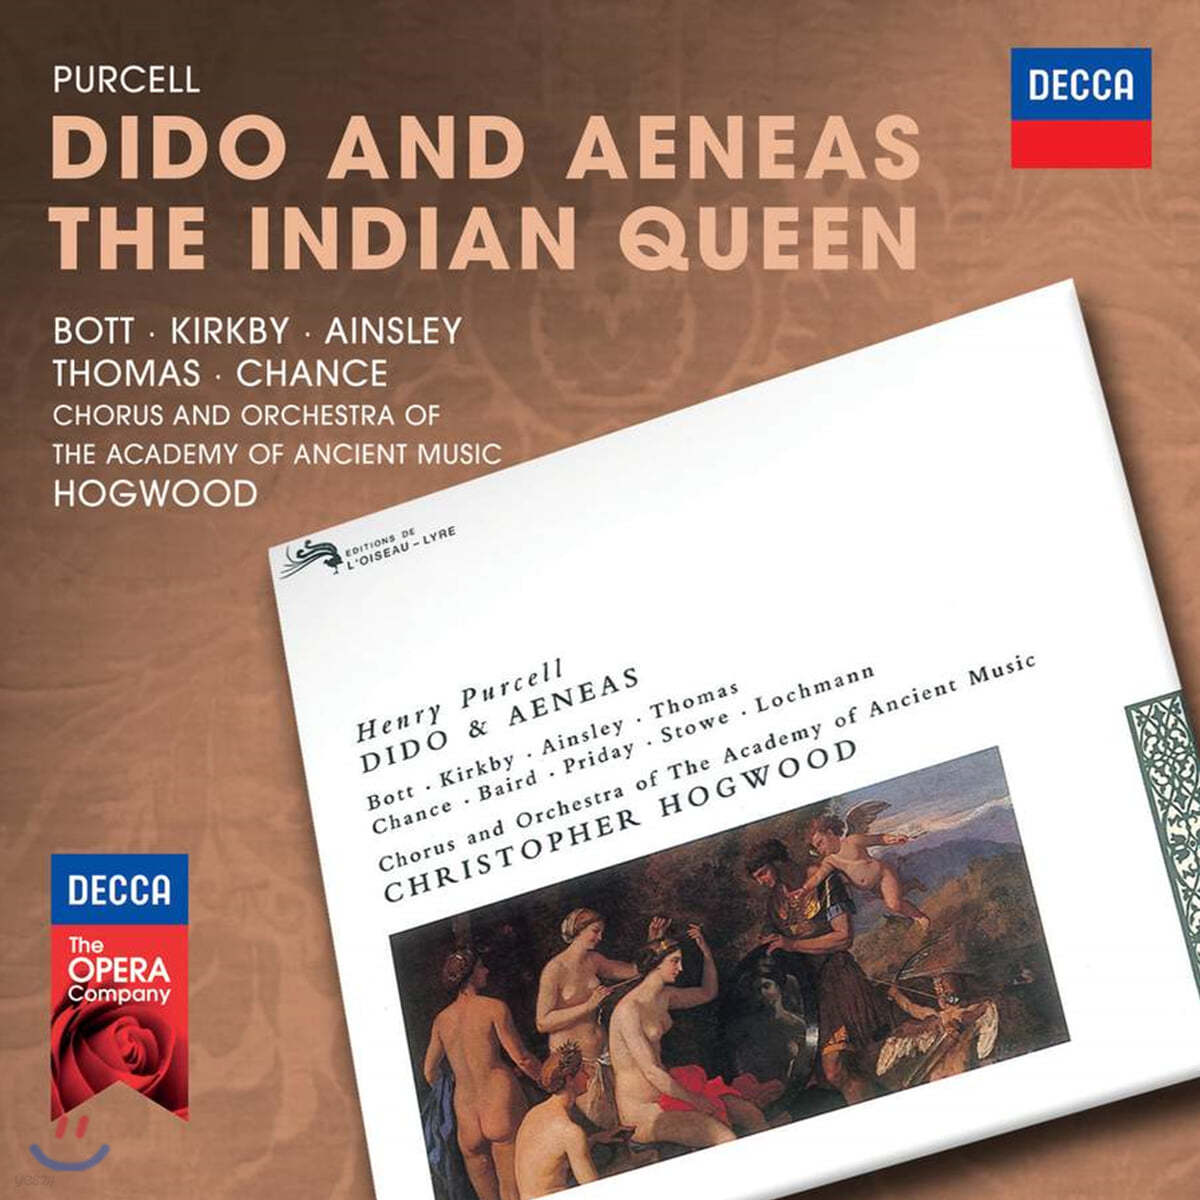 Christopher Hogwood 퍼셀: 디도와 에네아스, 인디안 퀸 (Purcell: Dido and Aeneas, The Indian Queen)